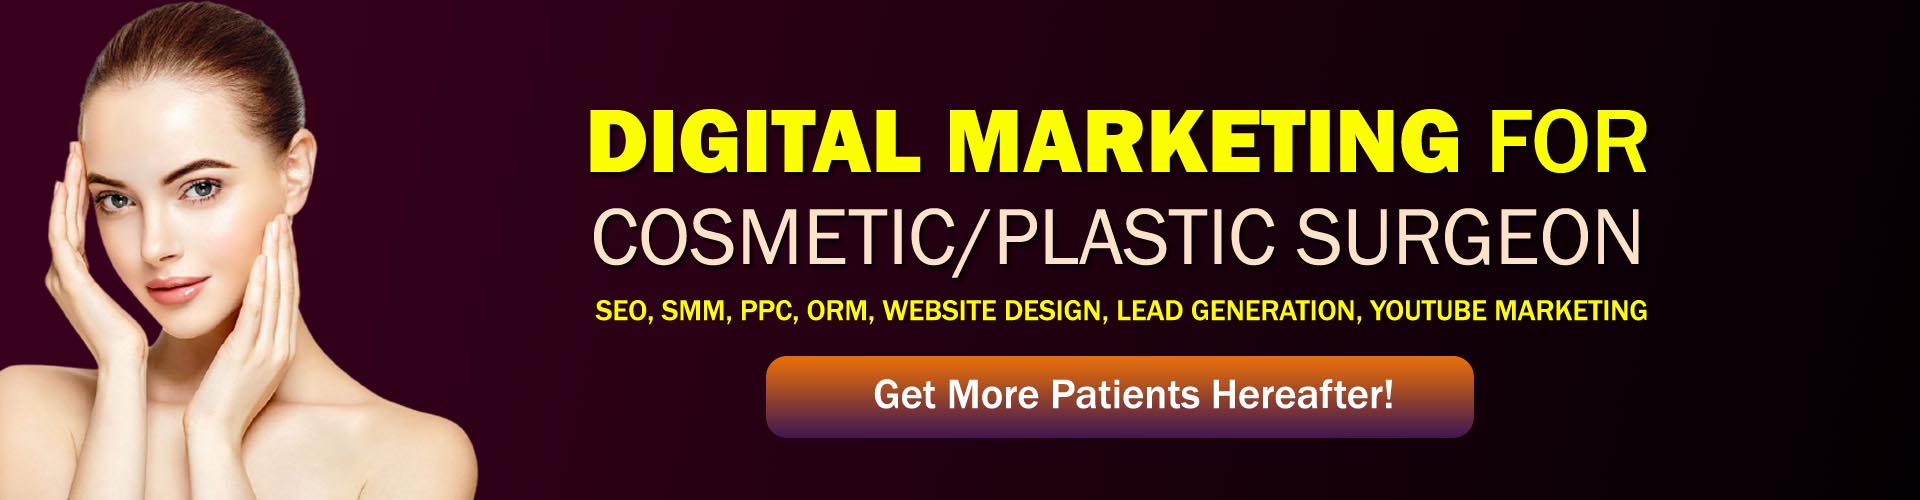 digital marketing for comsetic surgery